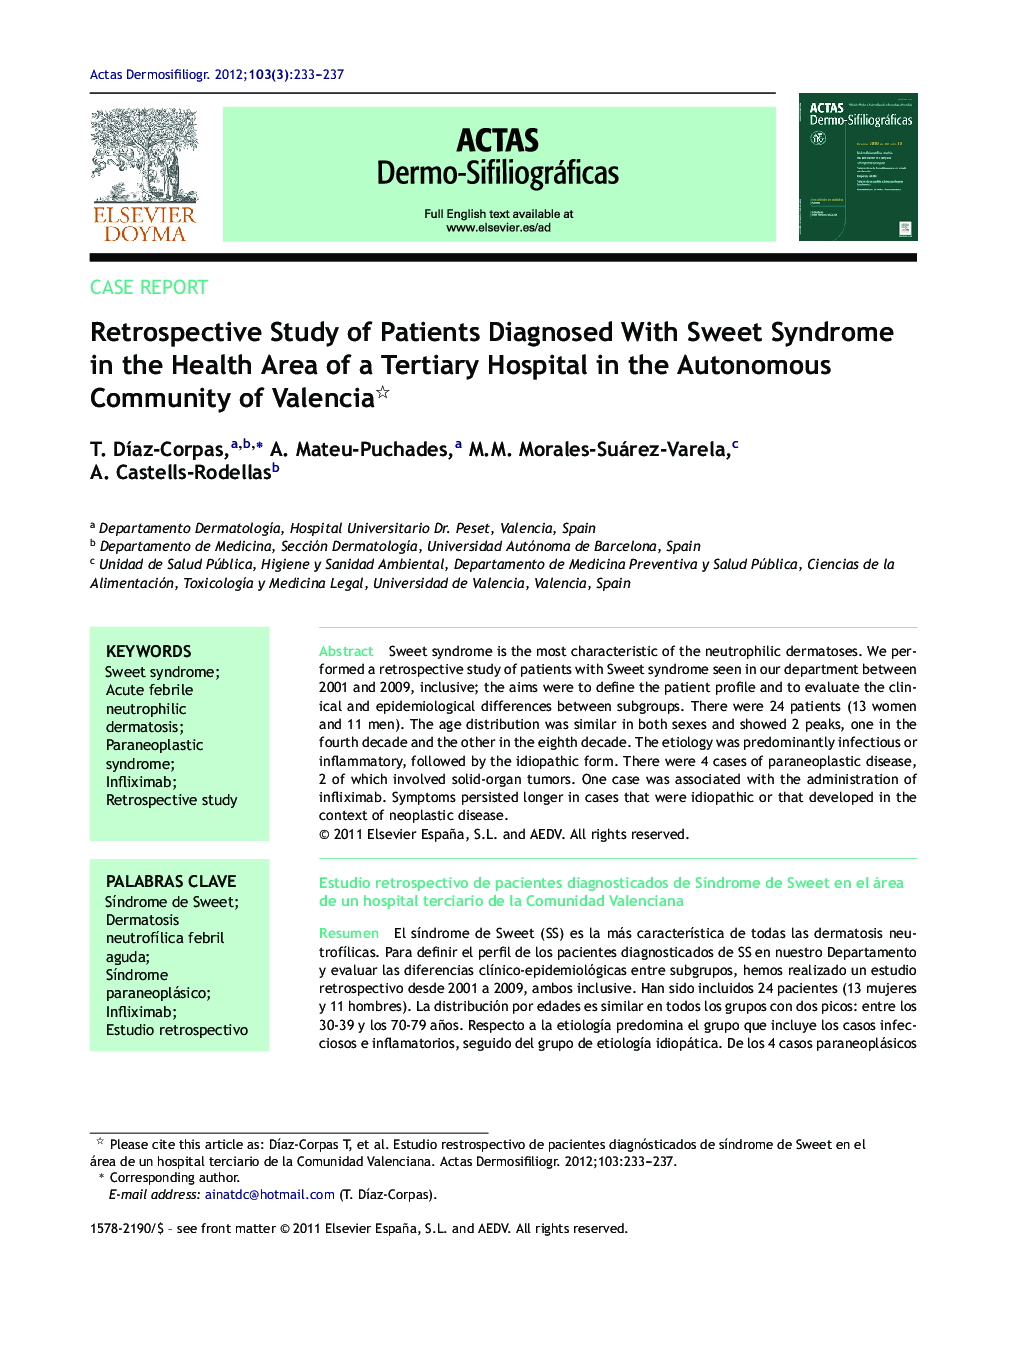 Retrospective Study of Patients Diagnosed With Sweet Syndrome in the Health Area of a Tertiary Hospital in the Autonomous Community of Valencia 